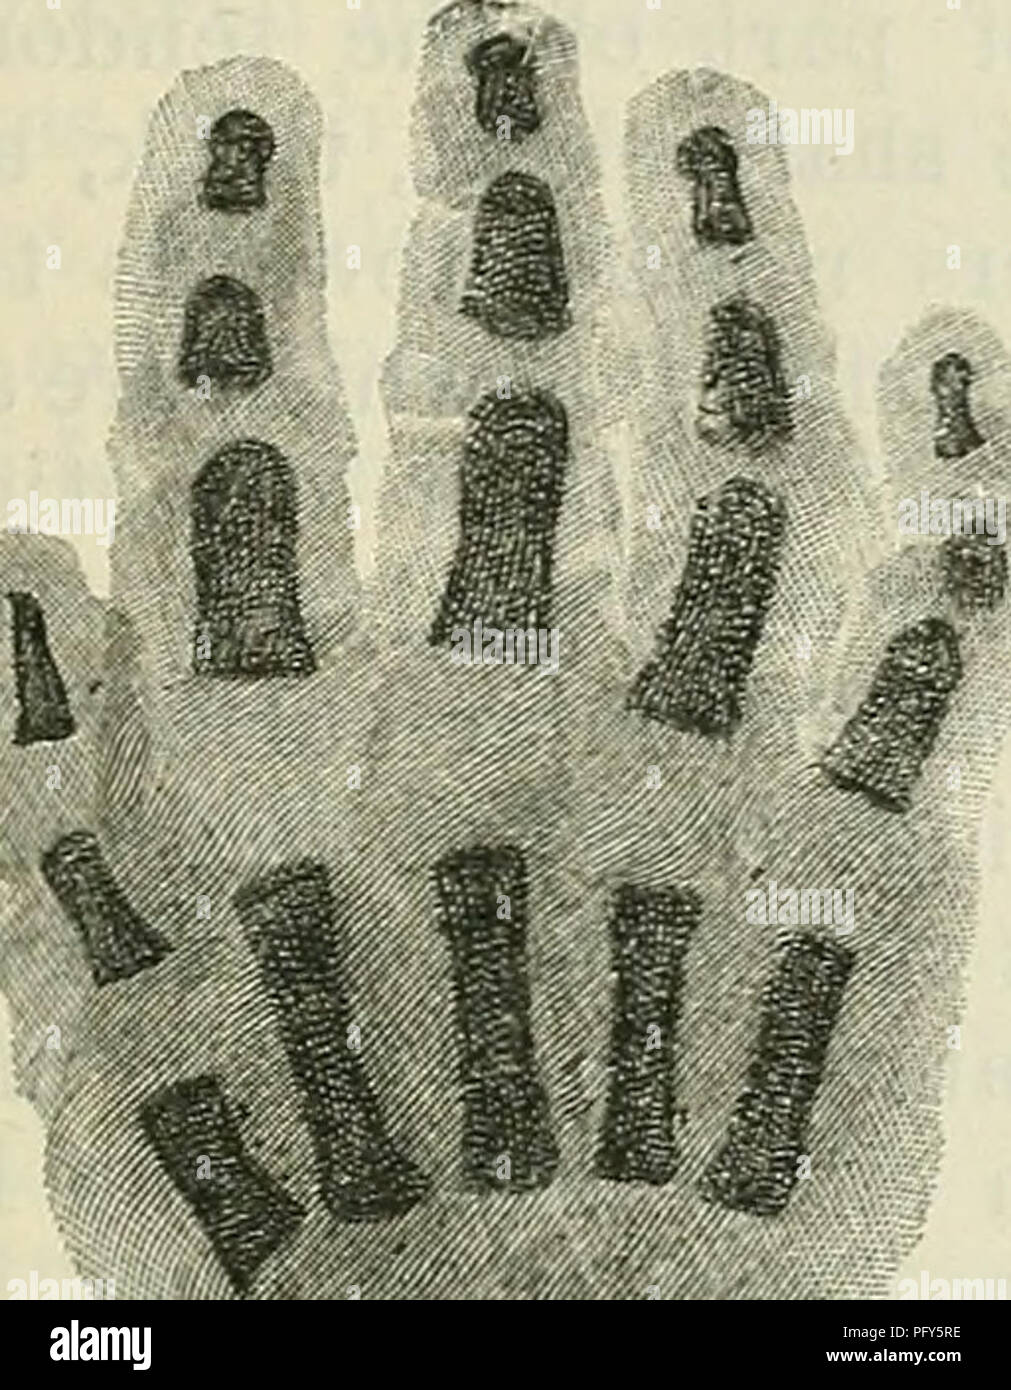 . Cunningham's Text-book of anatomy. Anatomy. THE METATAESUS. 265 tarsus determines the side-to-side roundness of the instep, whilst its plantar surface forms arches in both a transverse and longitudinal direction, in which the softer tissues of the sole are lodged, and so protected from injury. Ossification.—Unlike the carpus, the tarsus is at birth partially ossified. At this period there is a well-marked osseous nucleus within the body and neck of the talus, and the calcaneus is extensively ossified. In the latter the deposition of earthy matter appears as early as the sixth month of foetal Stock Photo